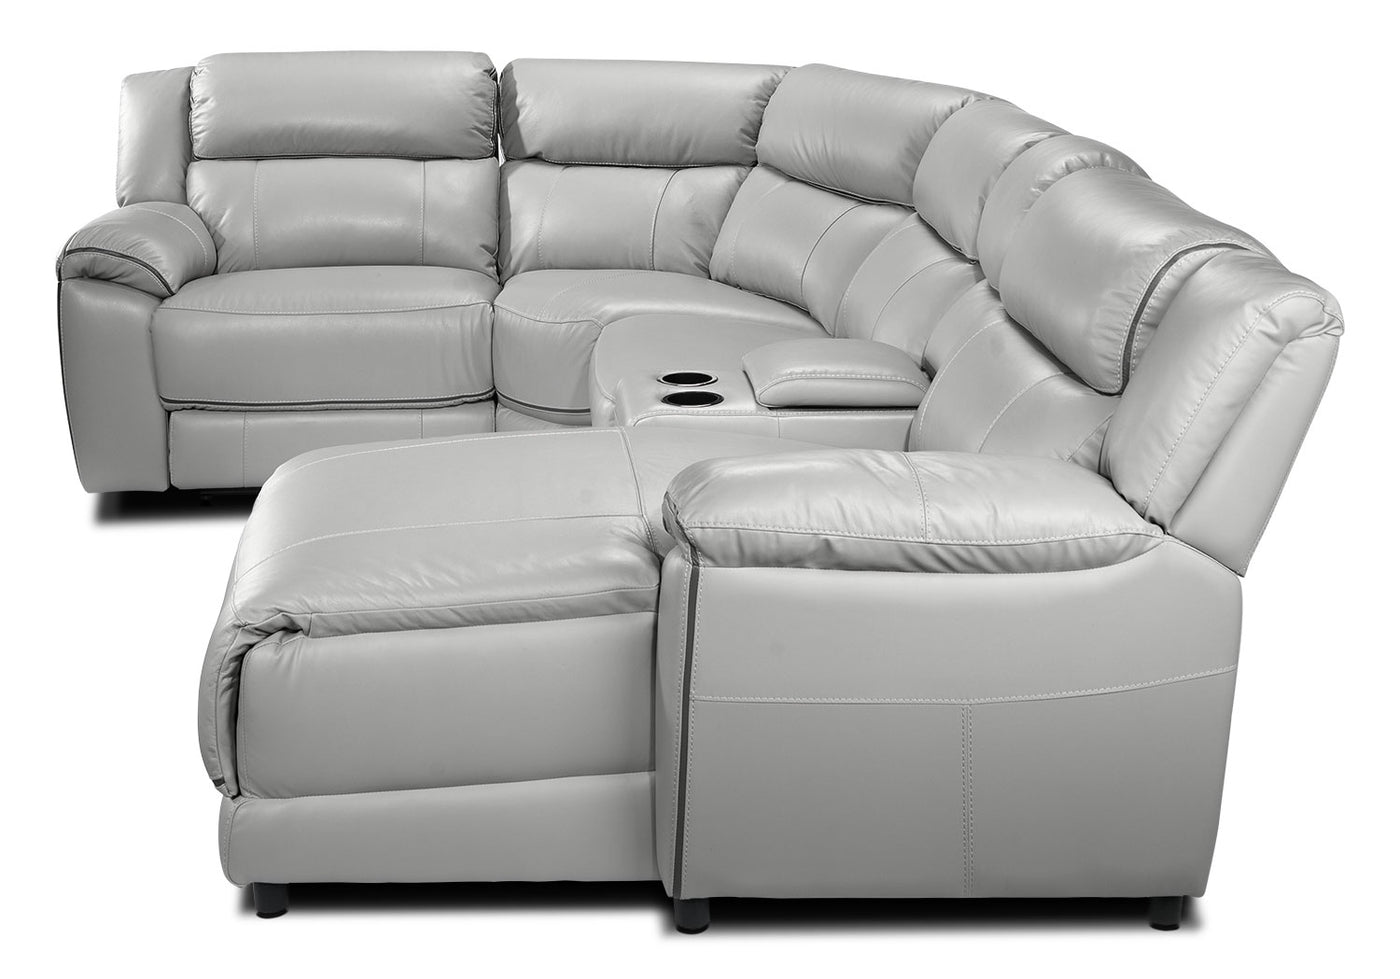 Holton Leather 5-Piece Sectional with Right-Facing Chaise - Grey